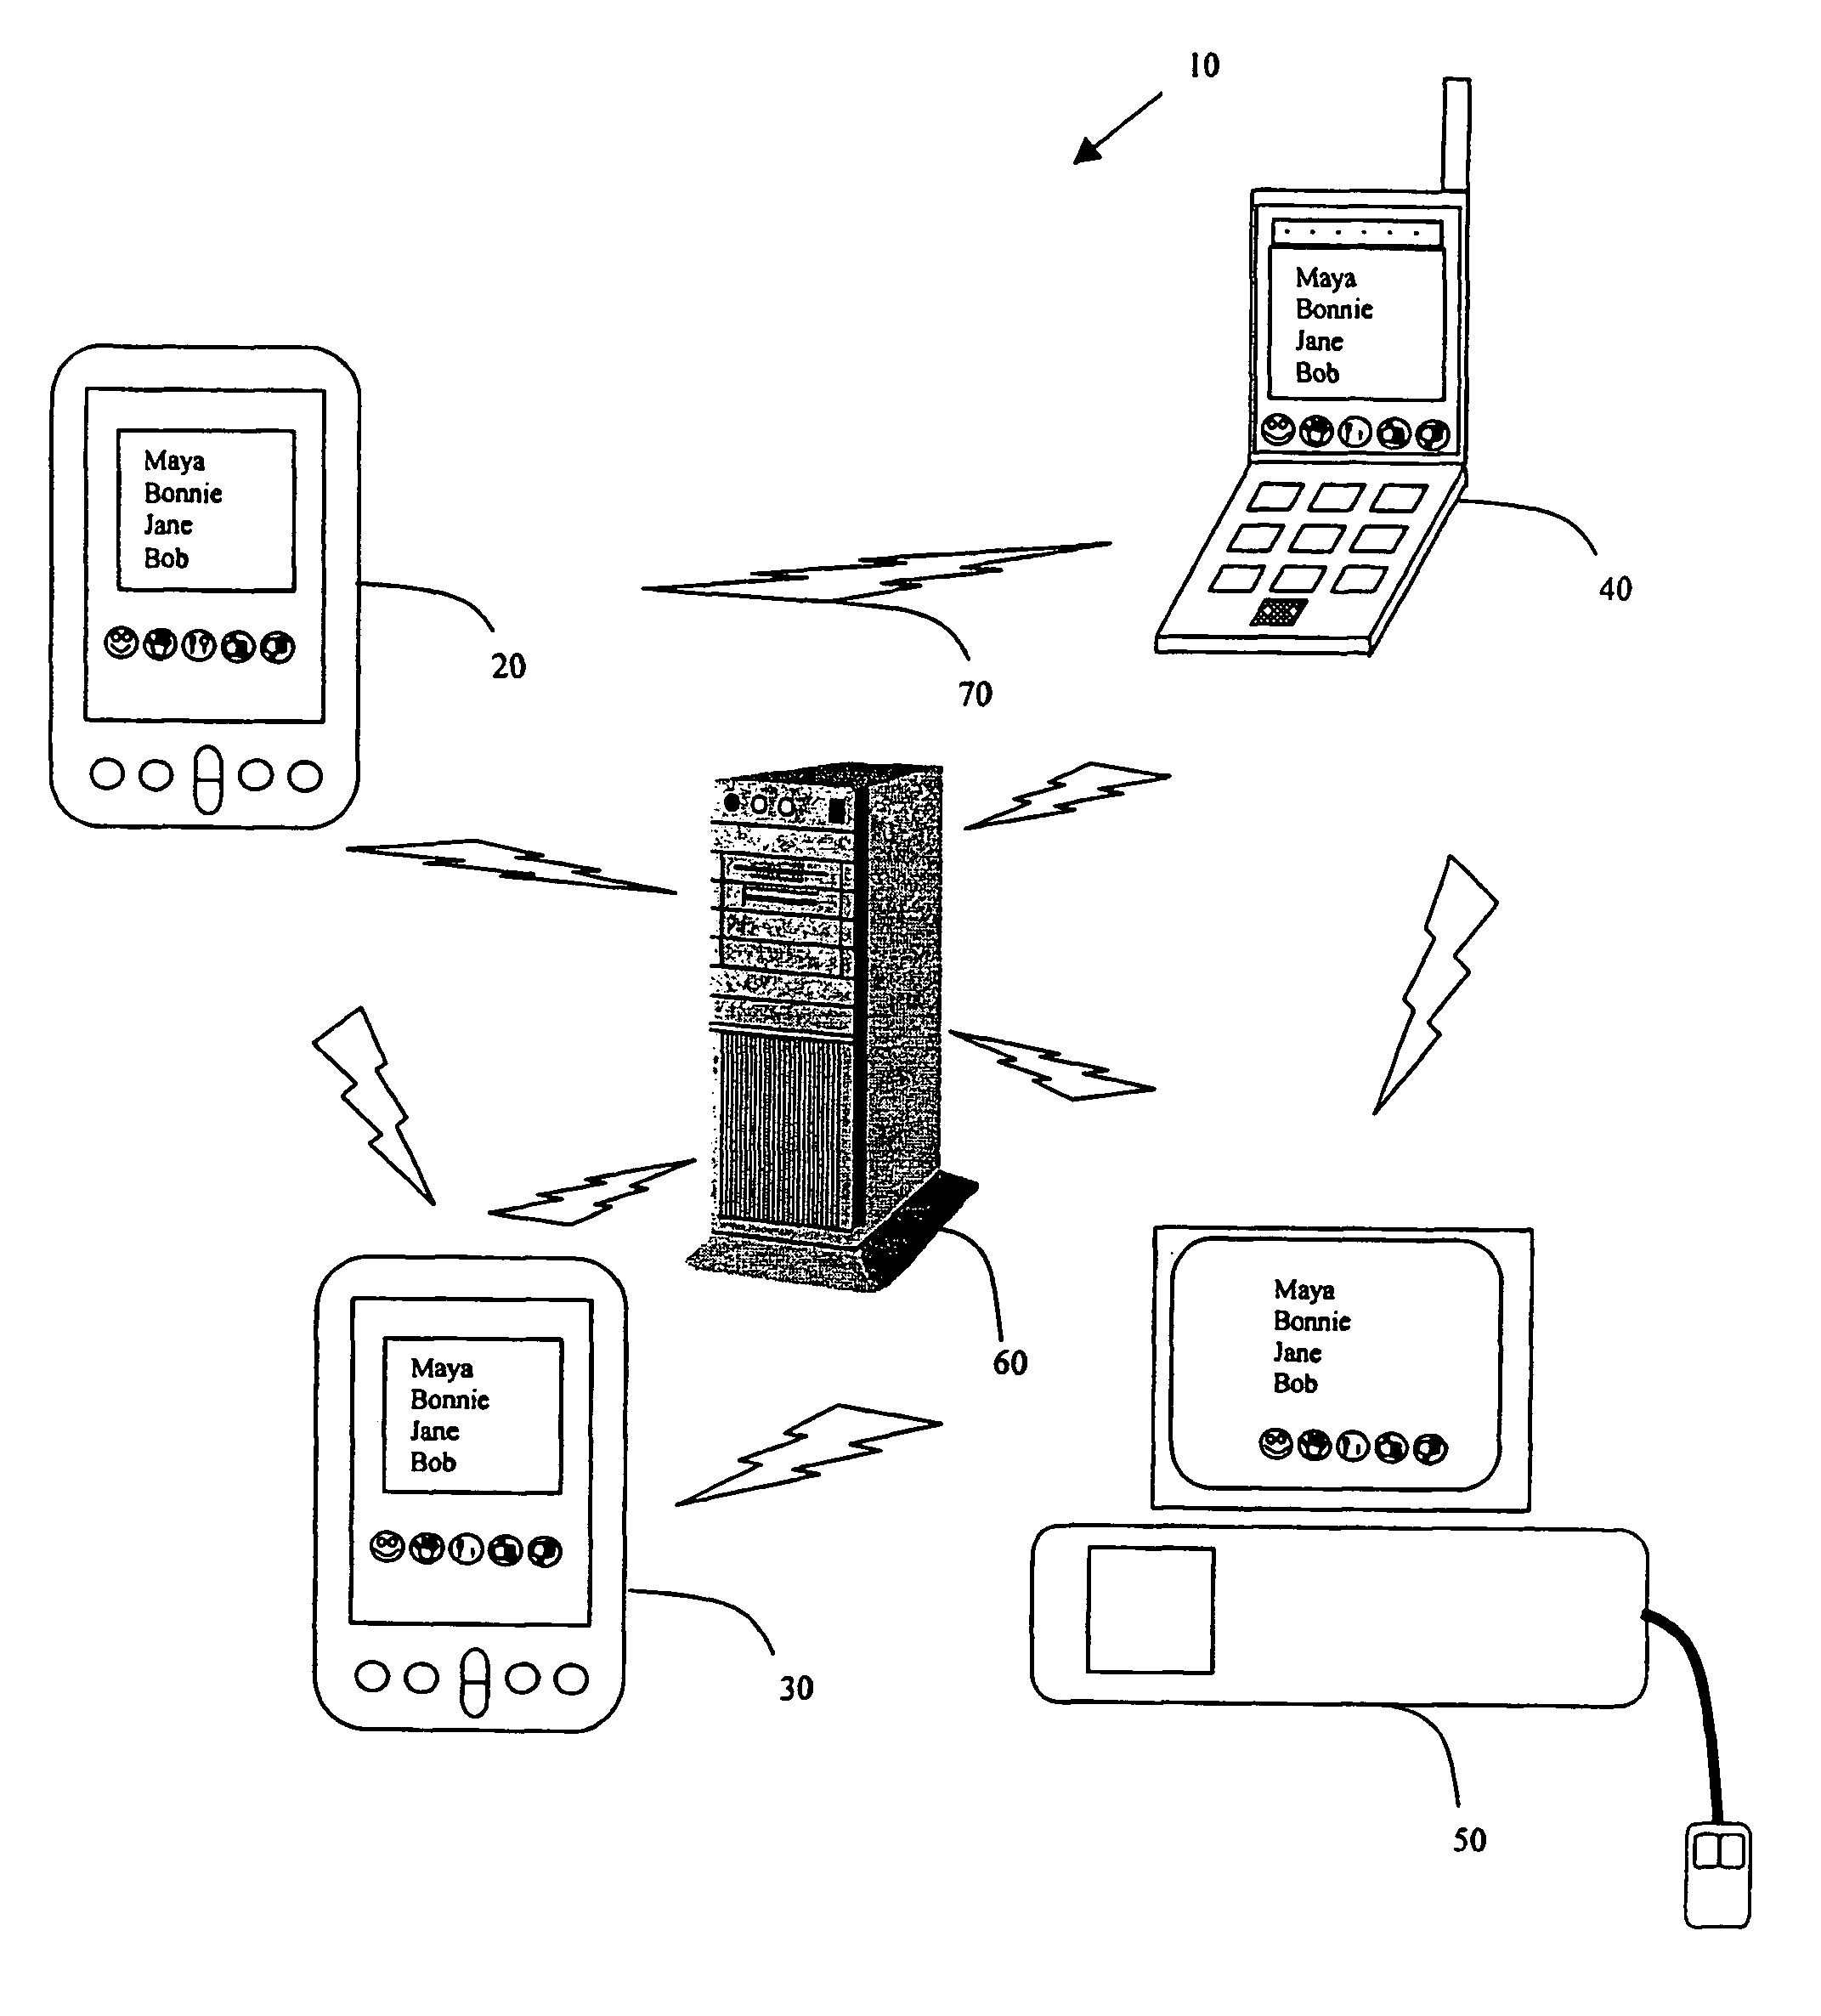 System, method and apparatus for communicating via sound messages and personal sound identifiers